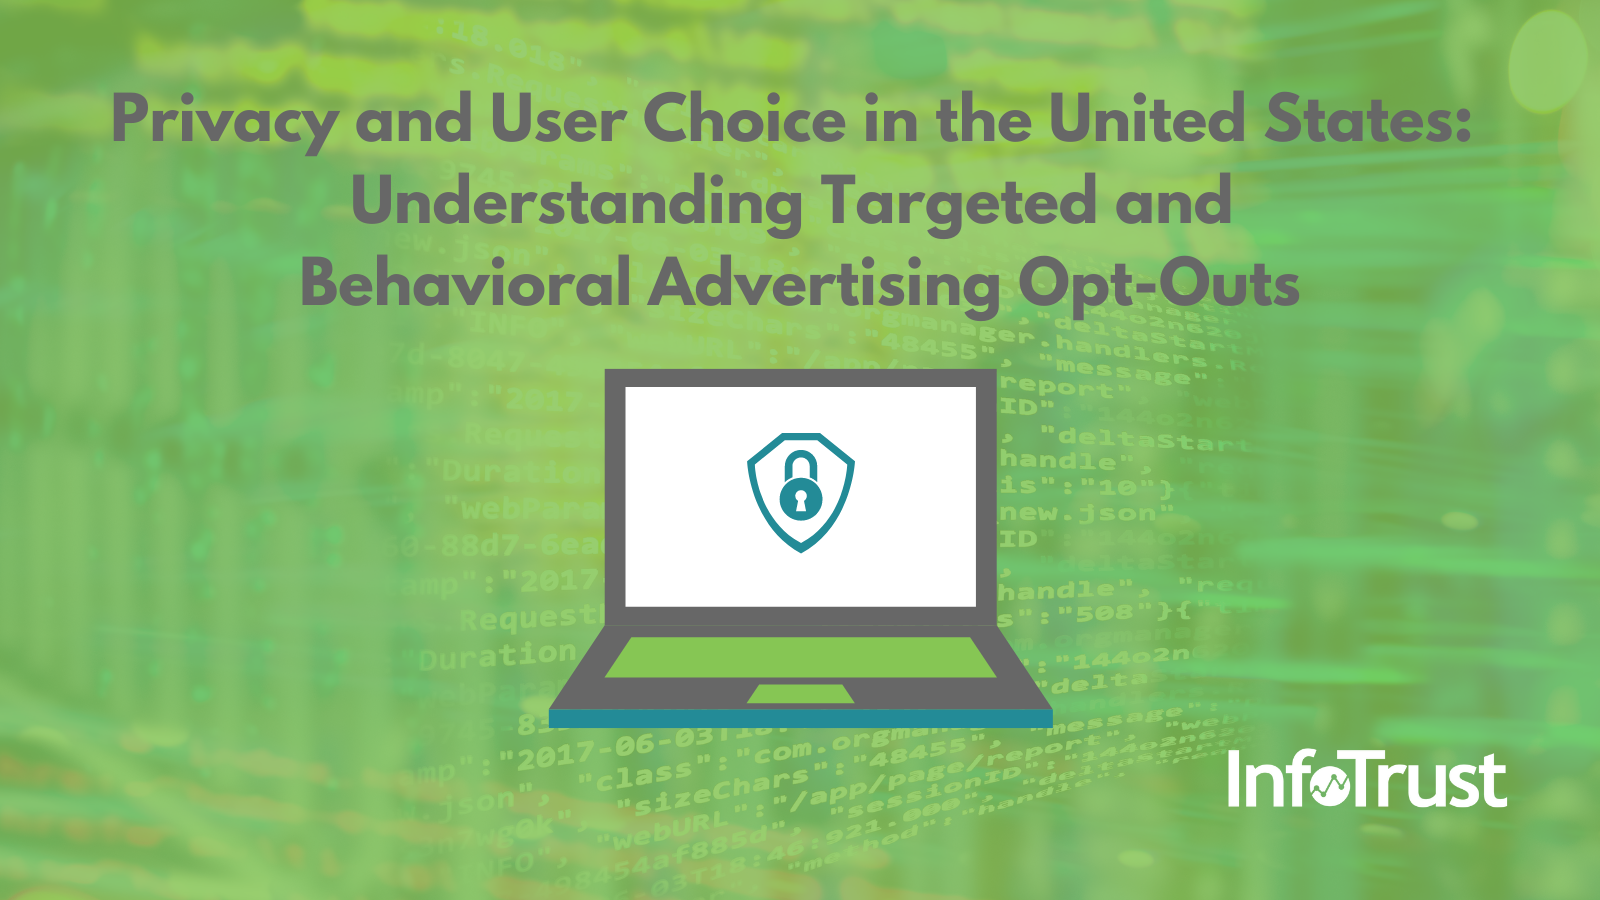 Privacy and User Choice in the United States: Understanding Targeted and Behavioral Advertising Opt-Outs